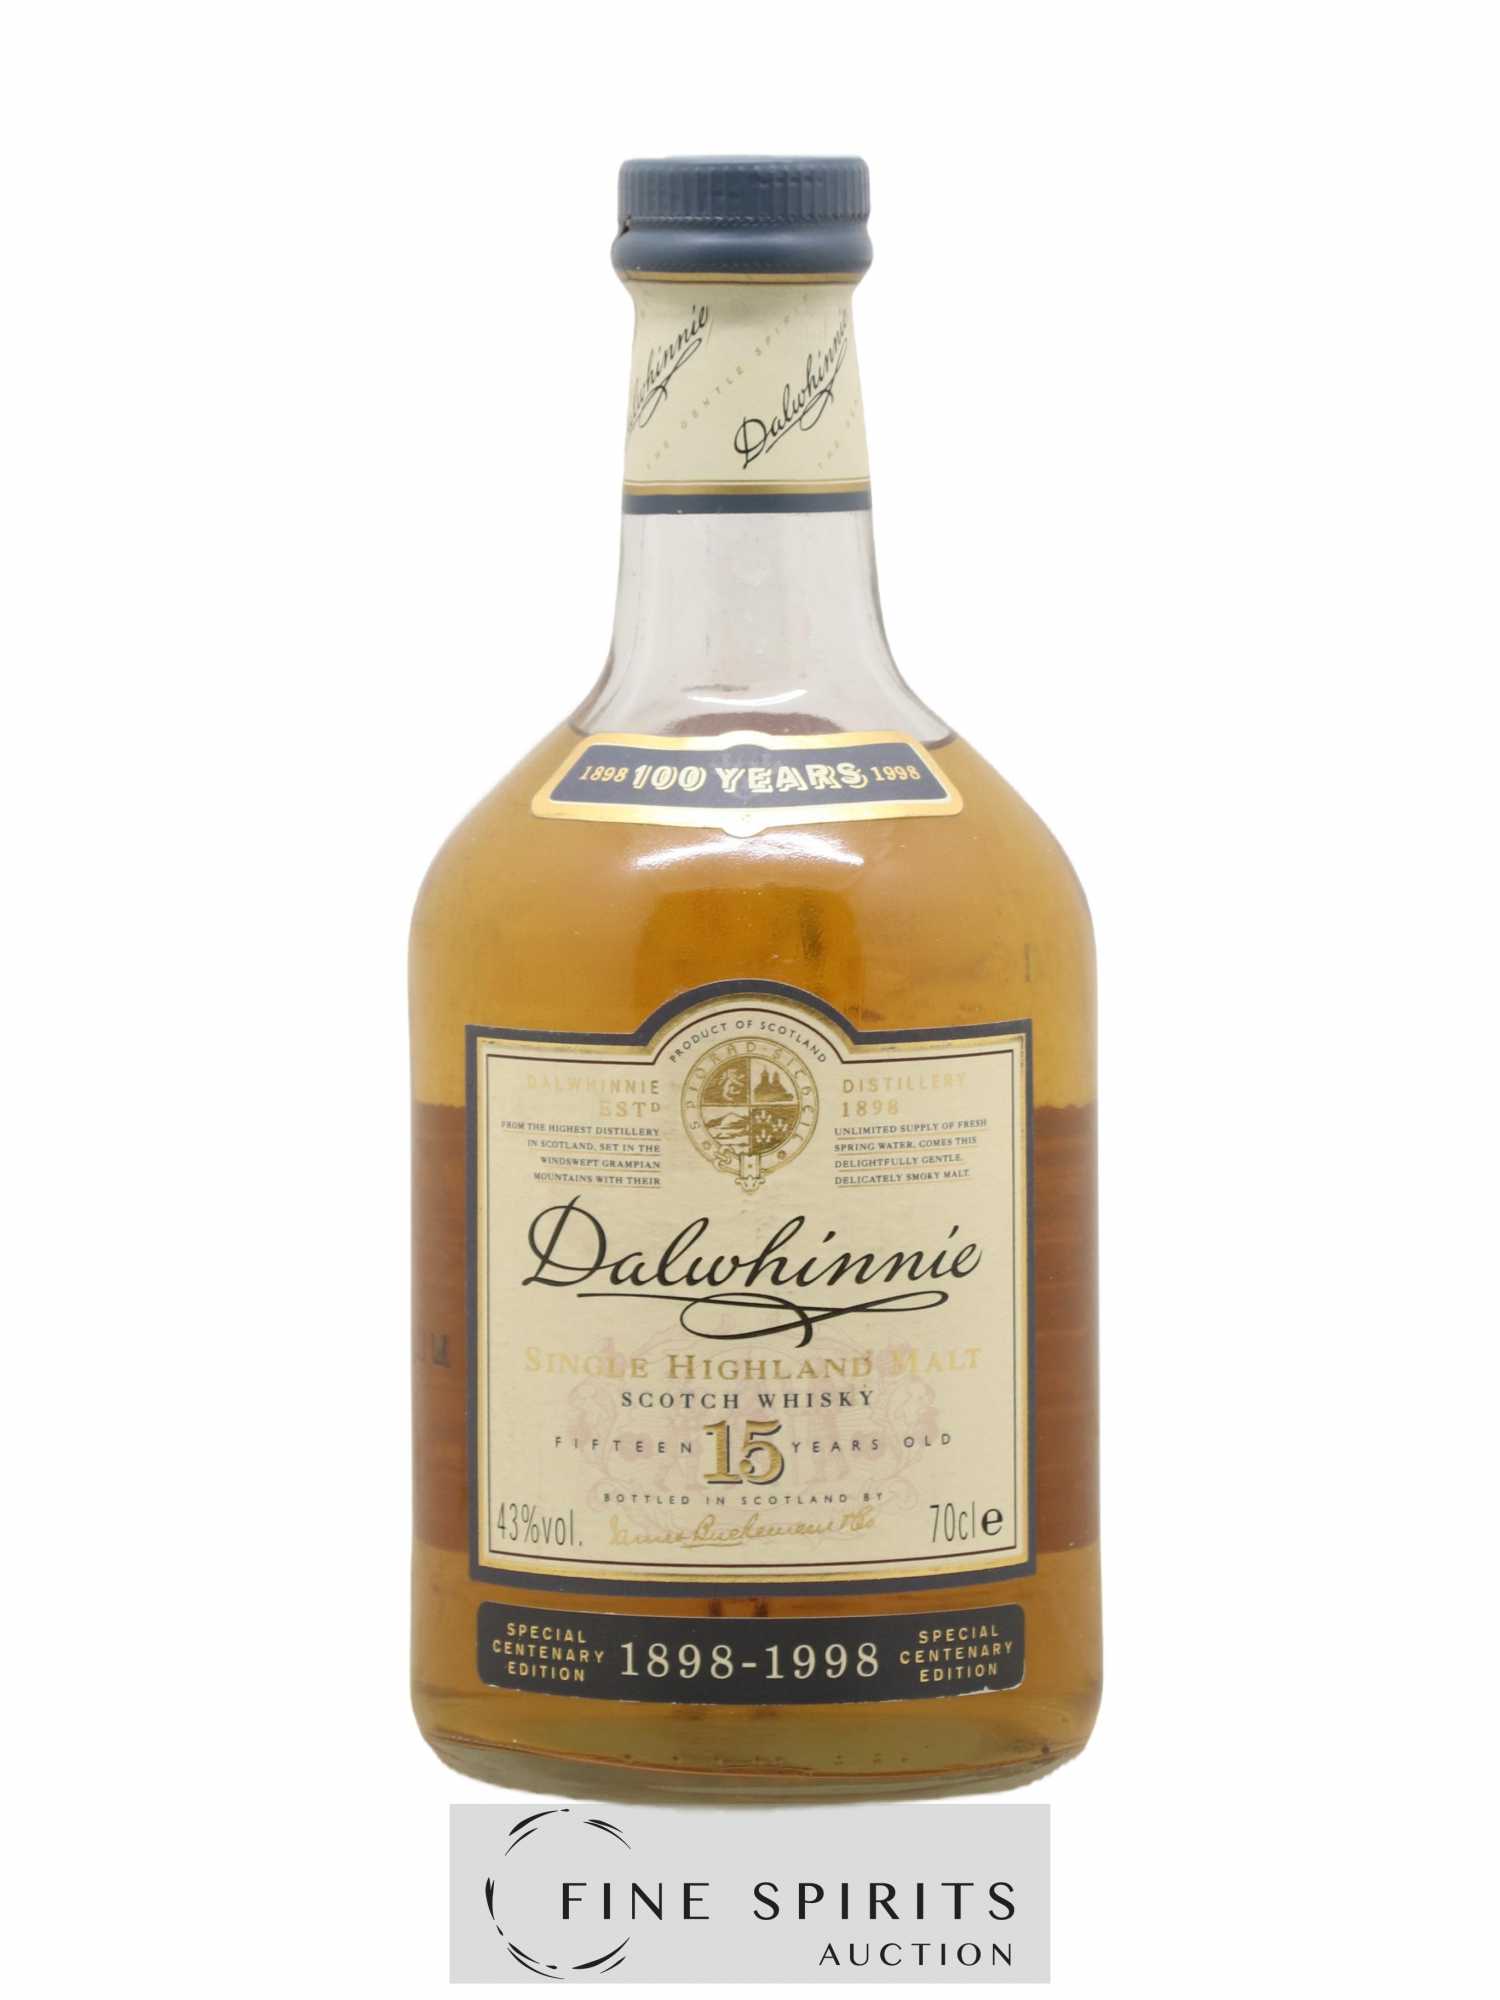 Dalwhinnie 15 years Of. 1898-1998 Centenary Edition One of 5000 